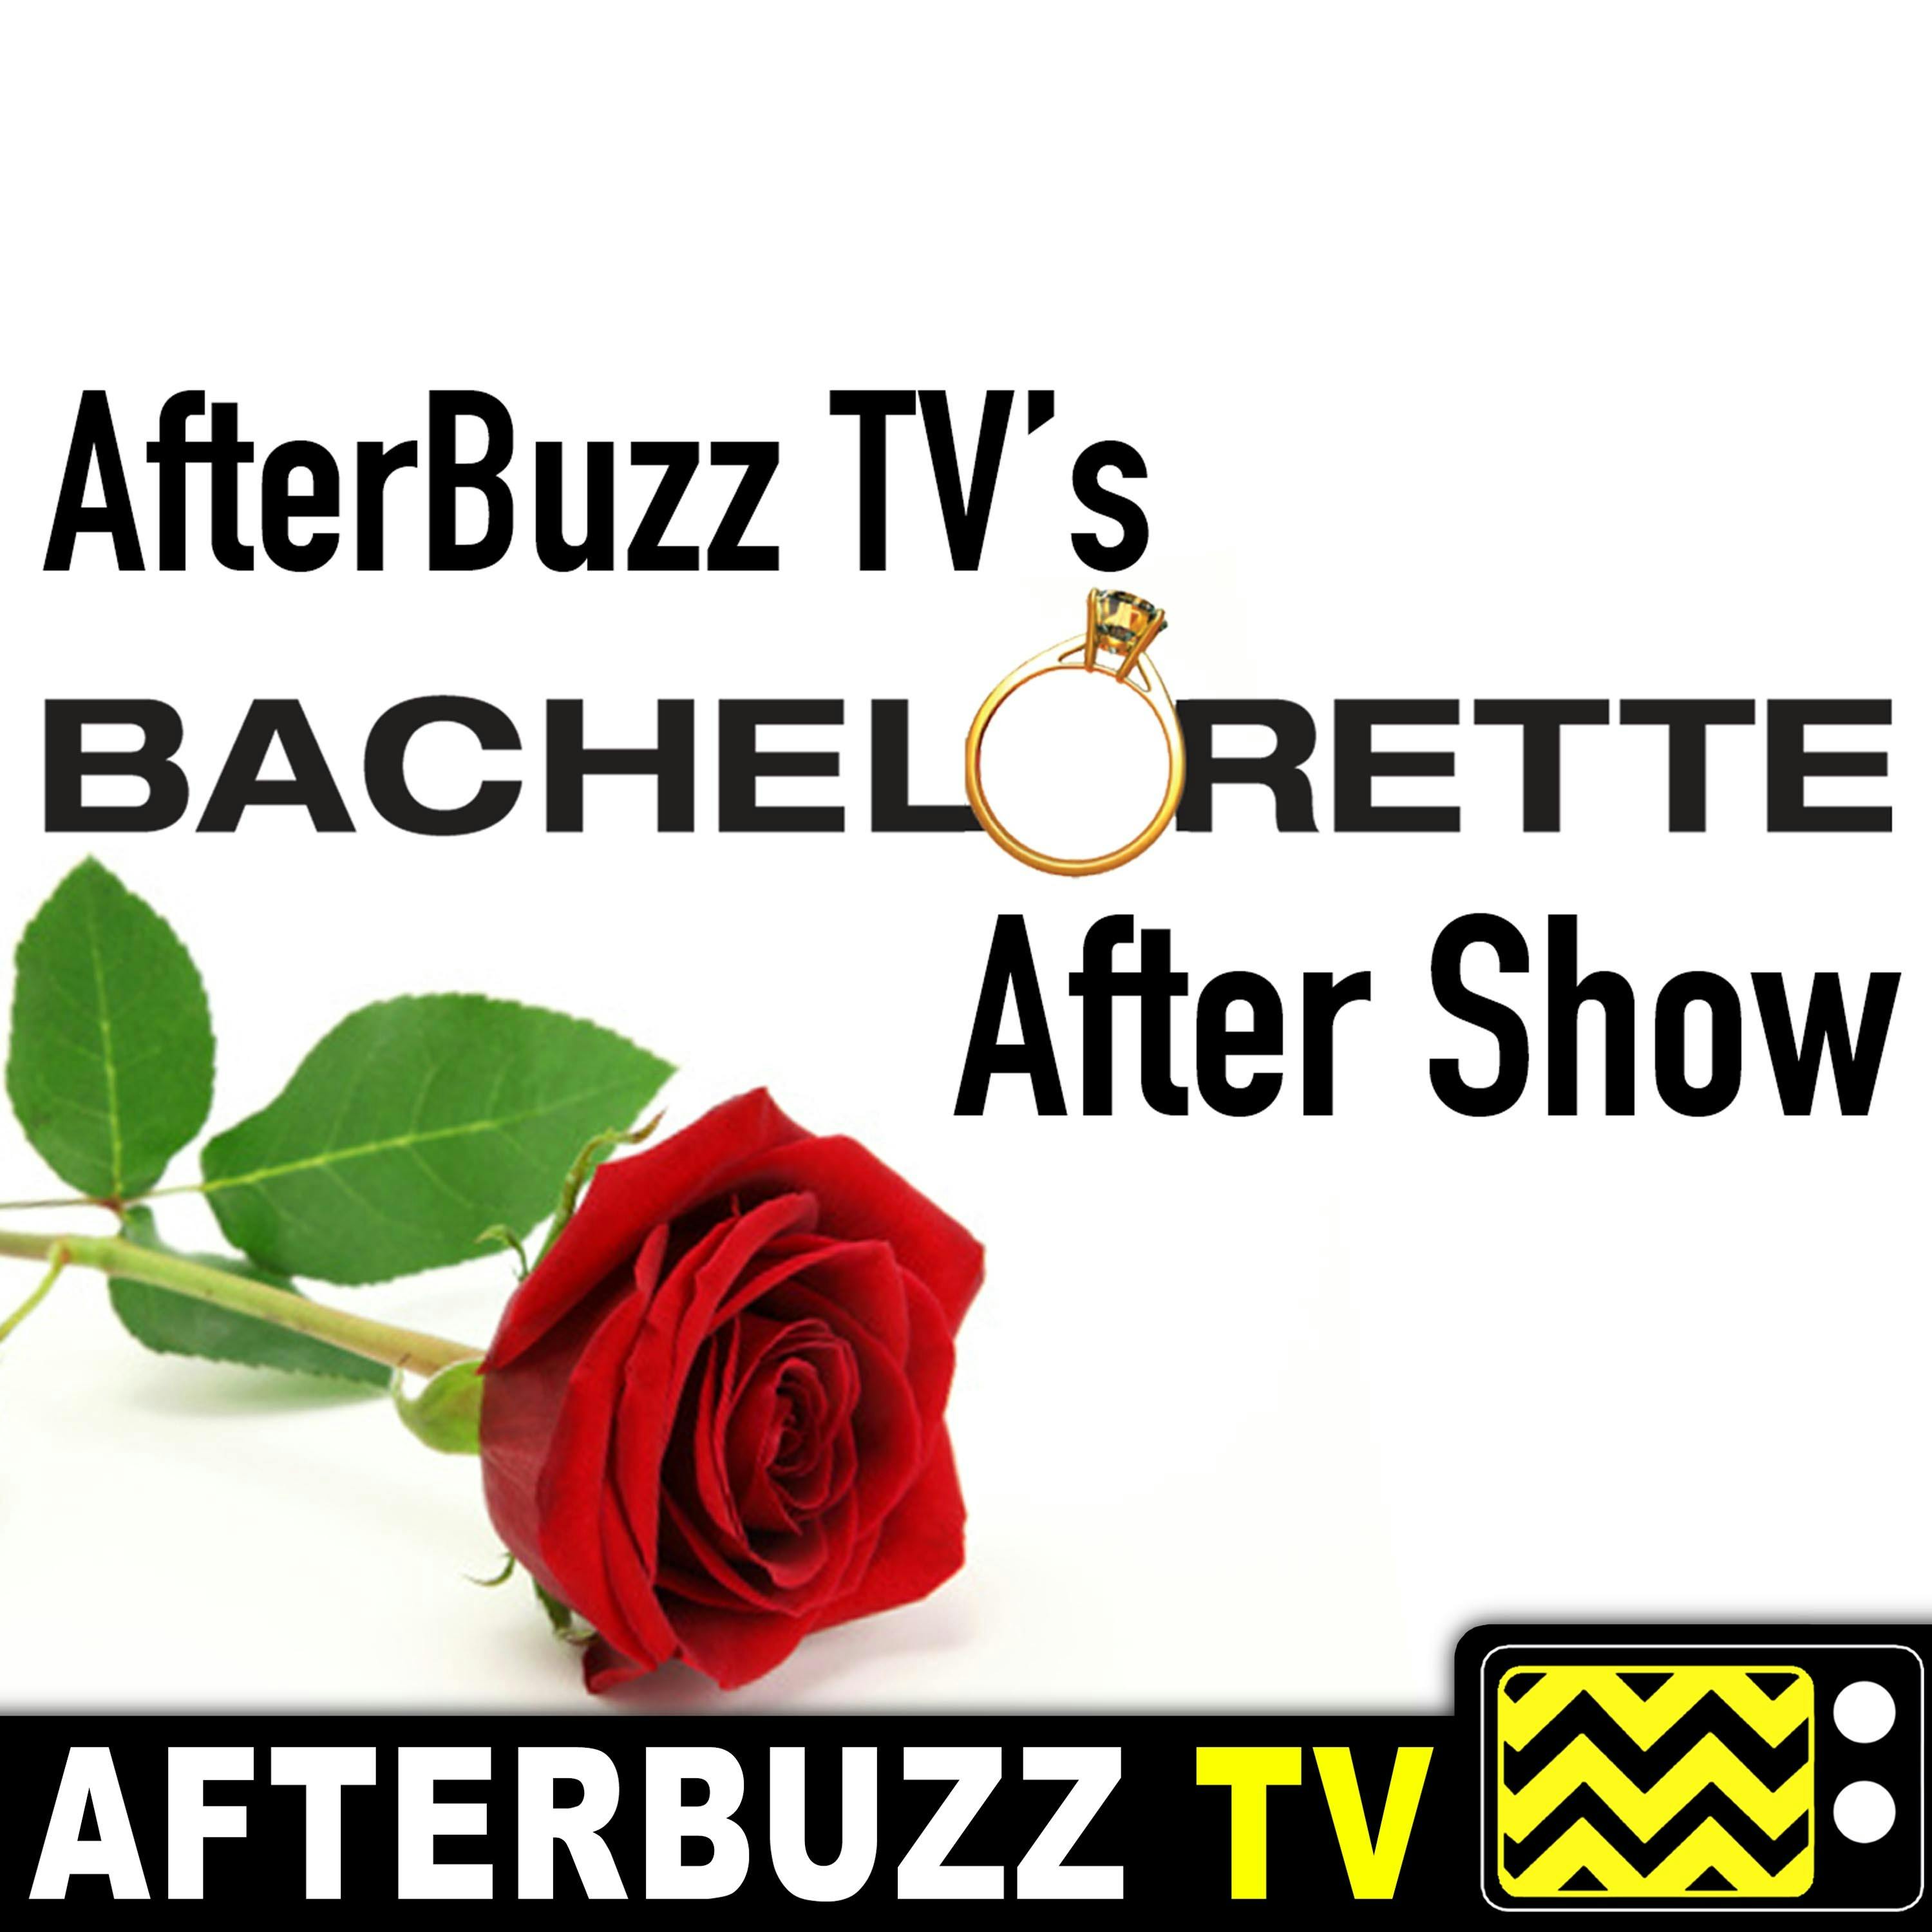 Sean Lowe Interview | AfterBuzz TV’s Reality Reunion